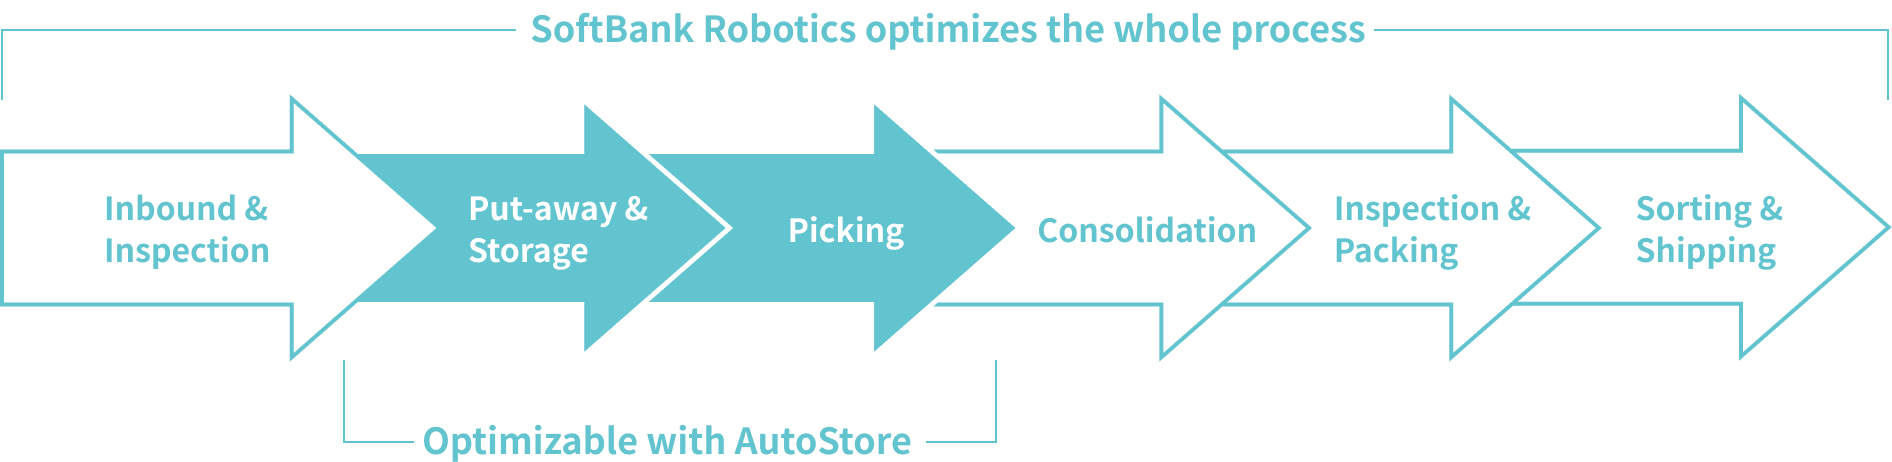 SoftBank Robotics optimizes the whole process：Inbound & Inspection → Put-away & Storage → Picking → Consolidation → Inspection & Packing → Sorting & Shipping Optimizable with AutoStore